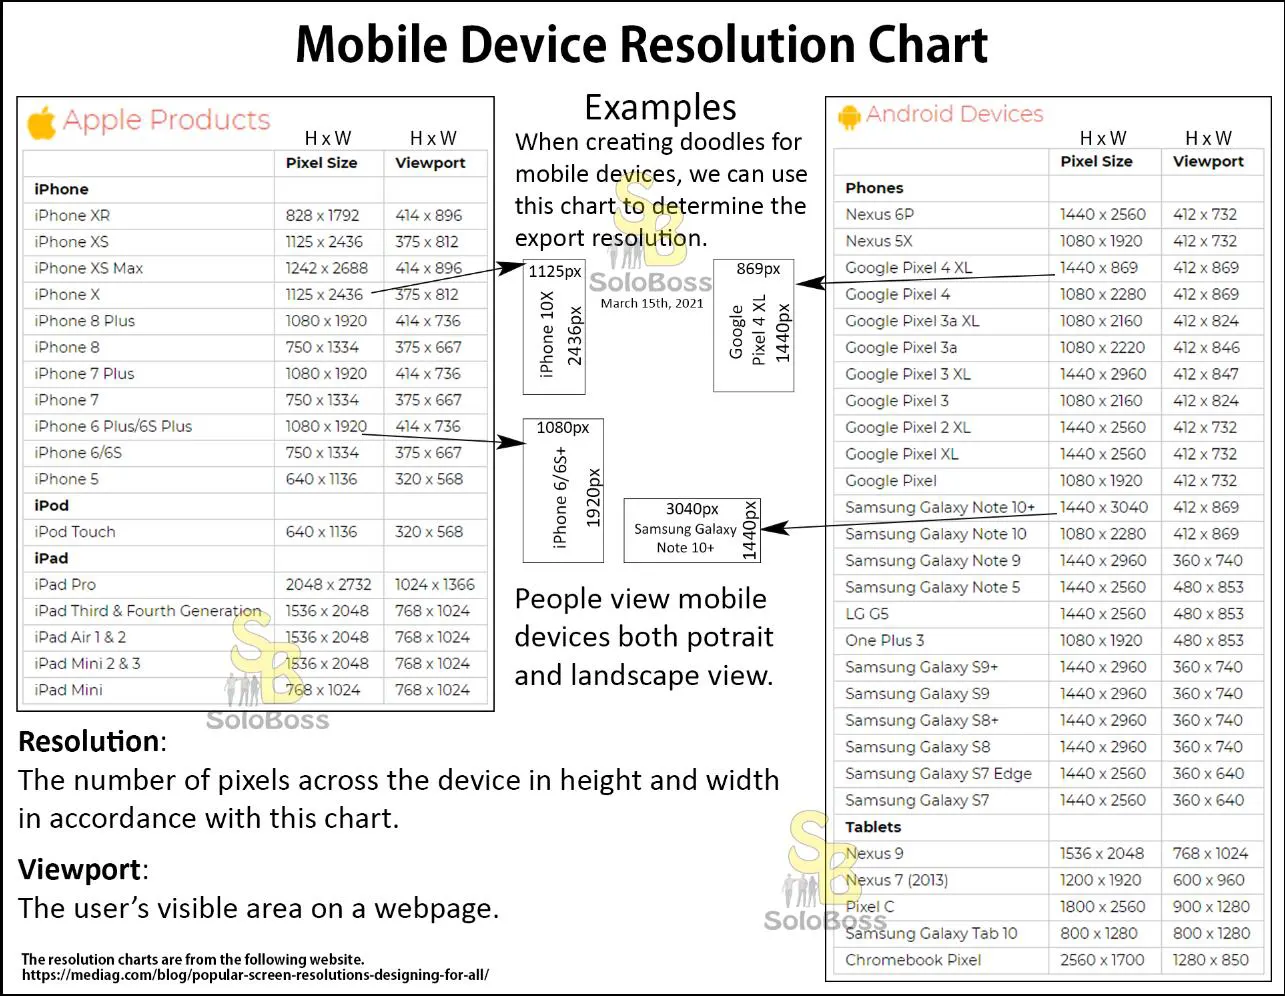 Mobile device resolution chart.